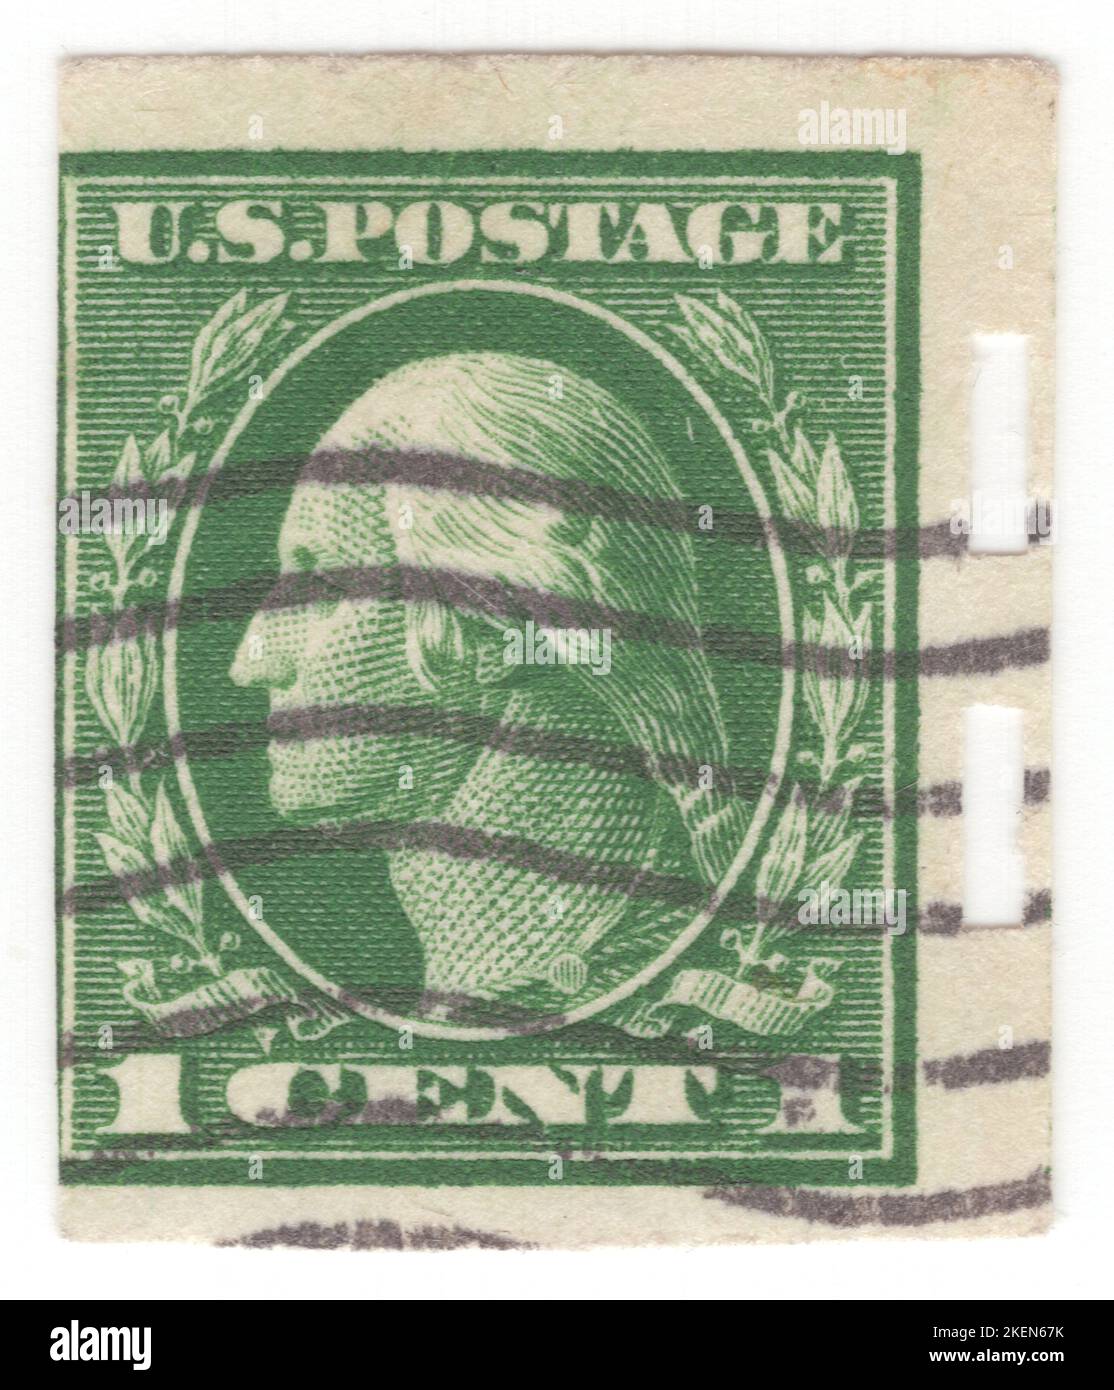 USA - 1908: An 1 cent green postage stamp depicting portrait of George Washington. American military officer, statesman, and Founding Father. Served as the first president of the USA. Shermack perforation. Appointed by the Continental Congress as commander of the Continental Army, Washington led the Patriot forces to victory in the American Revolutionary War and served as the president of the Constitutional Convention of 1787, which created the Constitution of the United States and the American federal government. Washington has been called the 'Father of his Country' Stock Photo